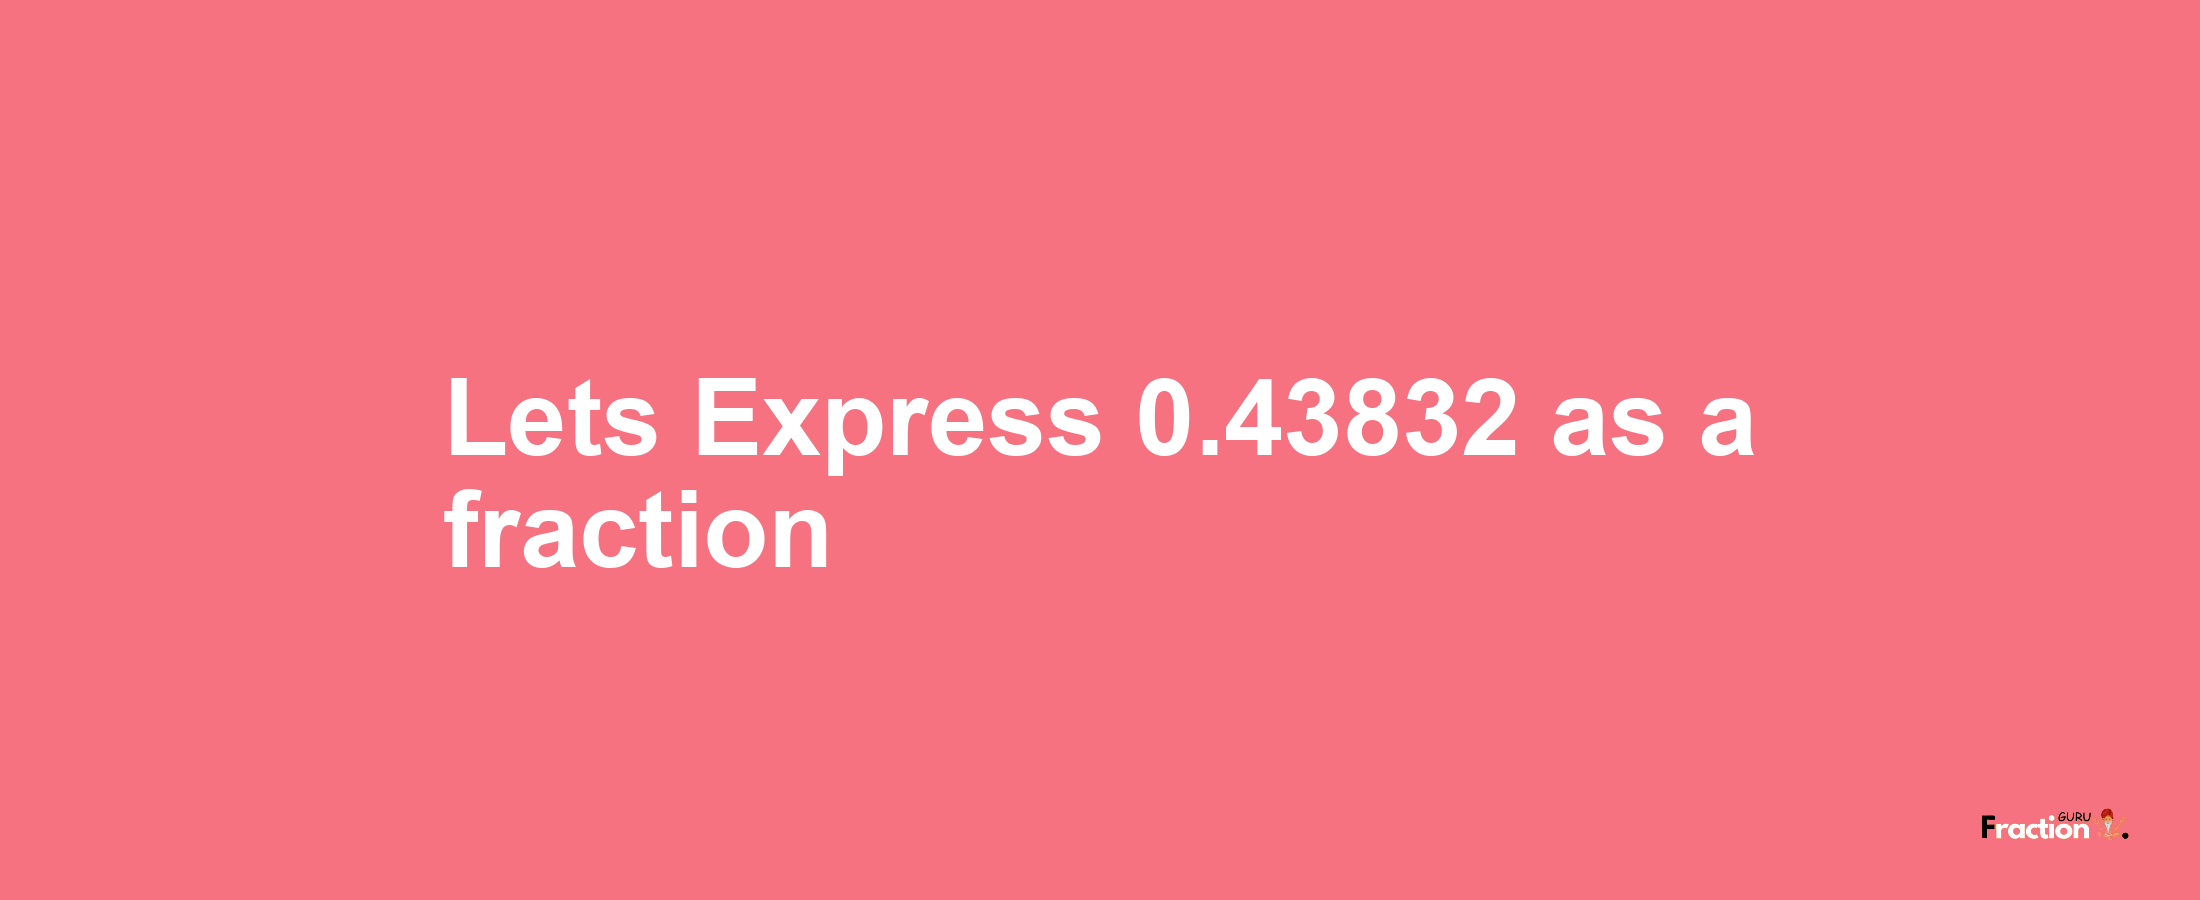 Lets Express 0.43832 as afraction